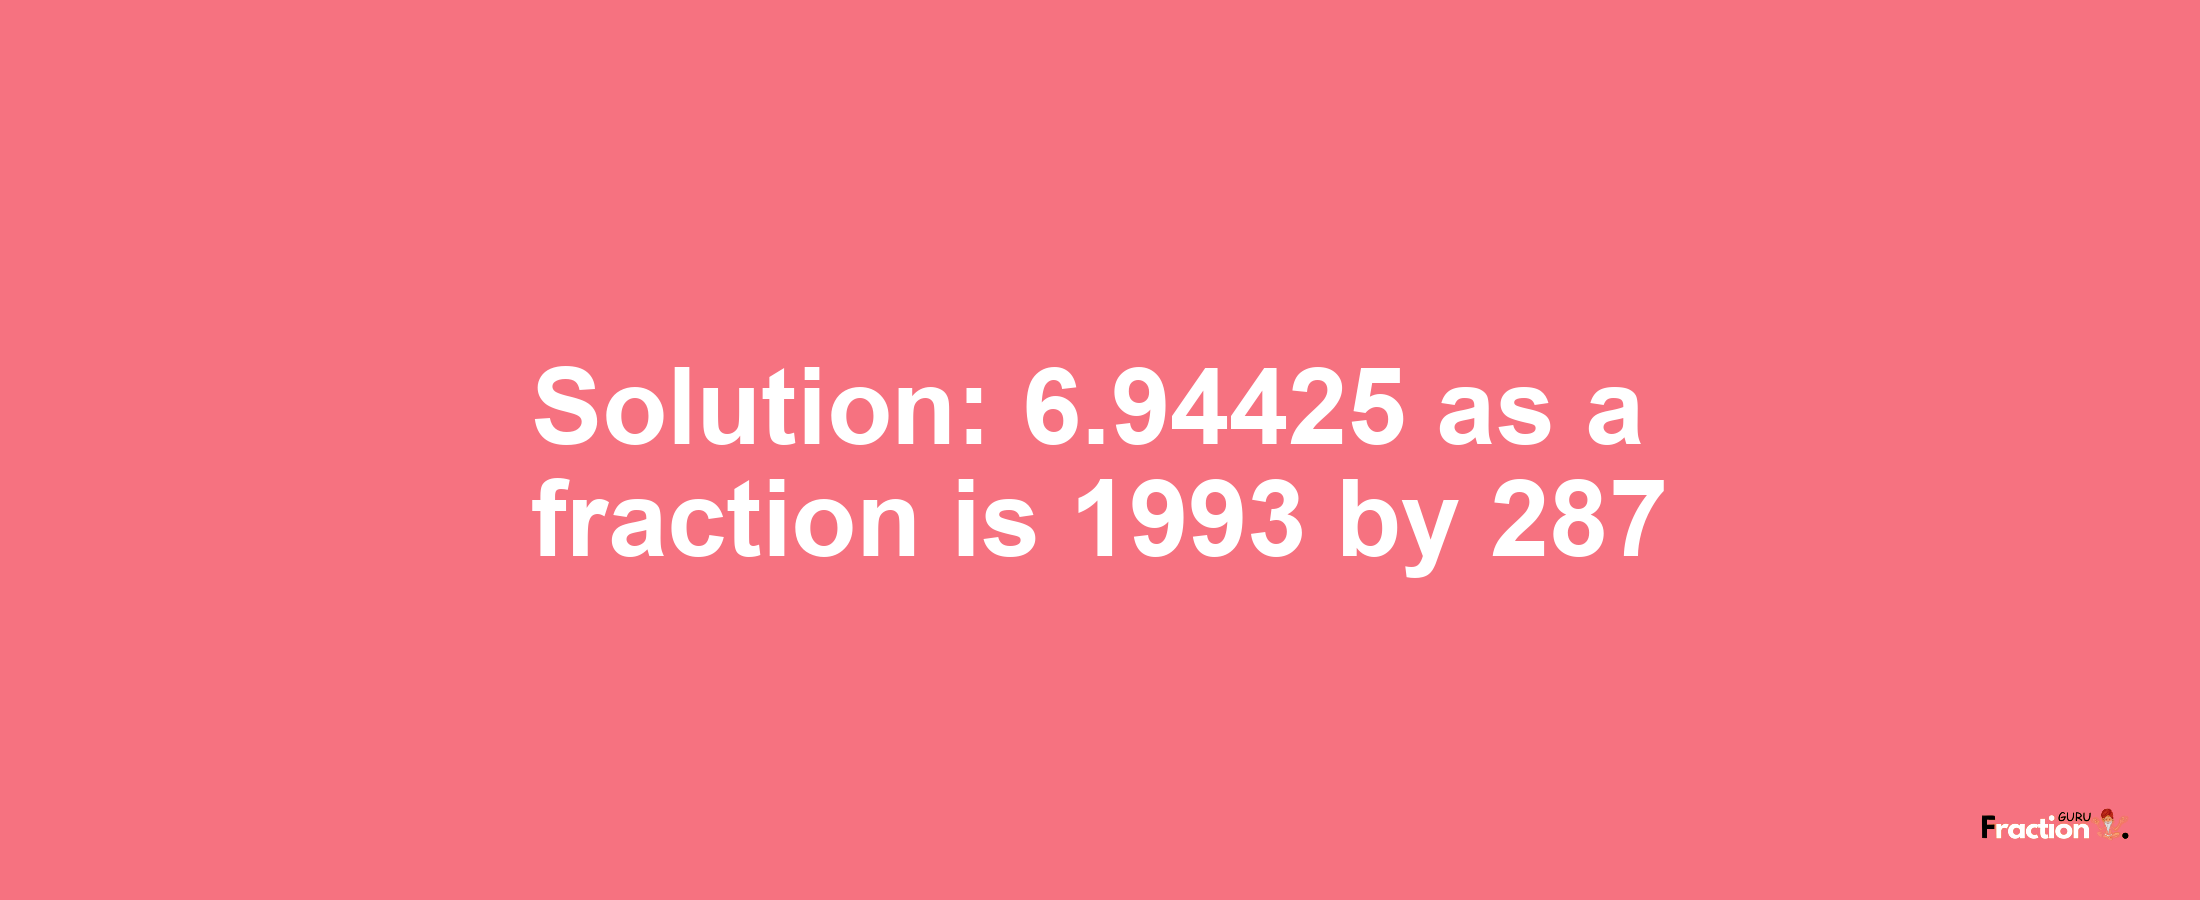 Solution:6.94425 as a fraction is 1993/287